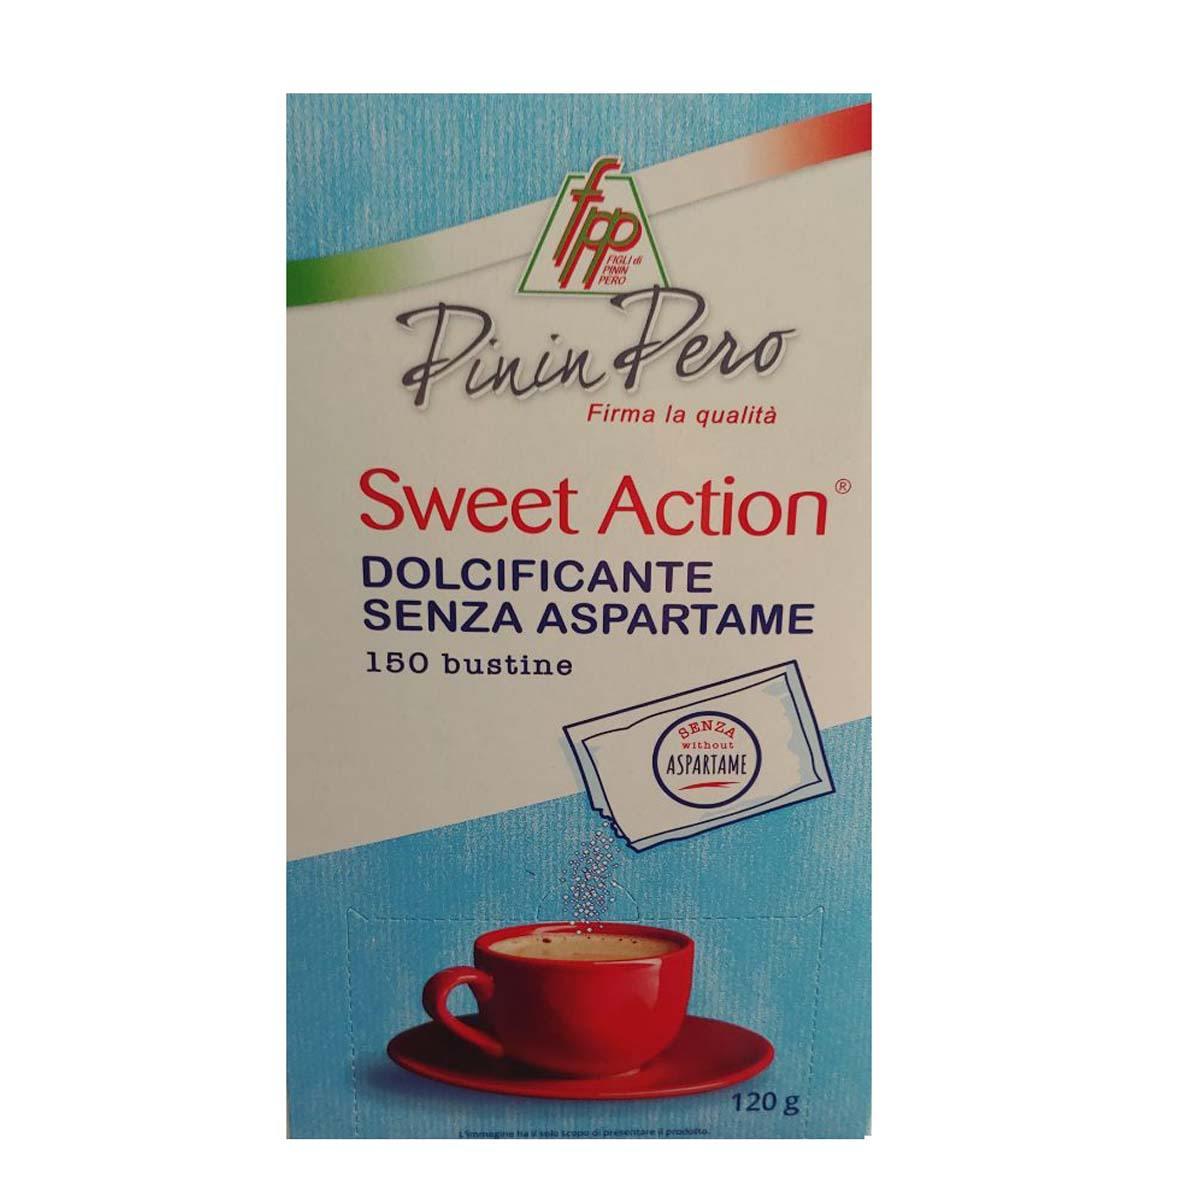 Dolcificante sweet action - 150 bustine